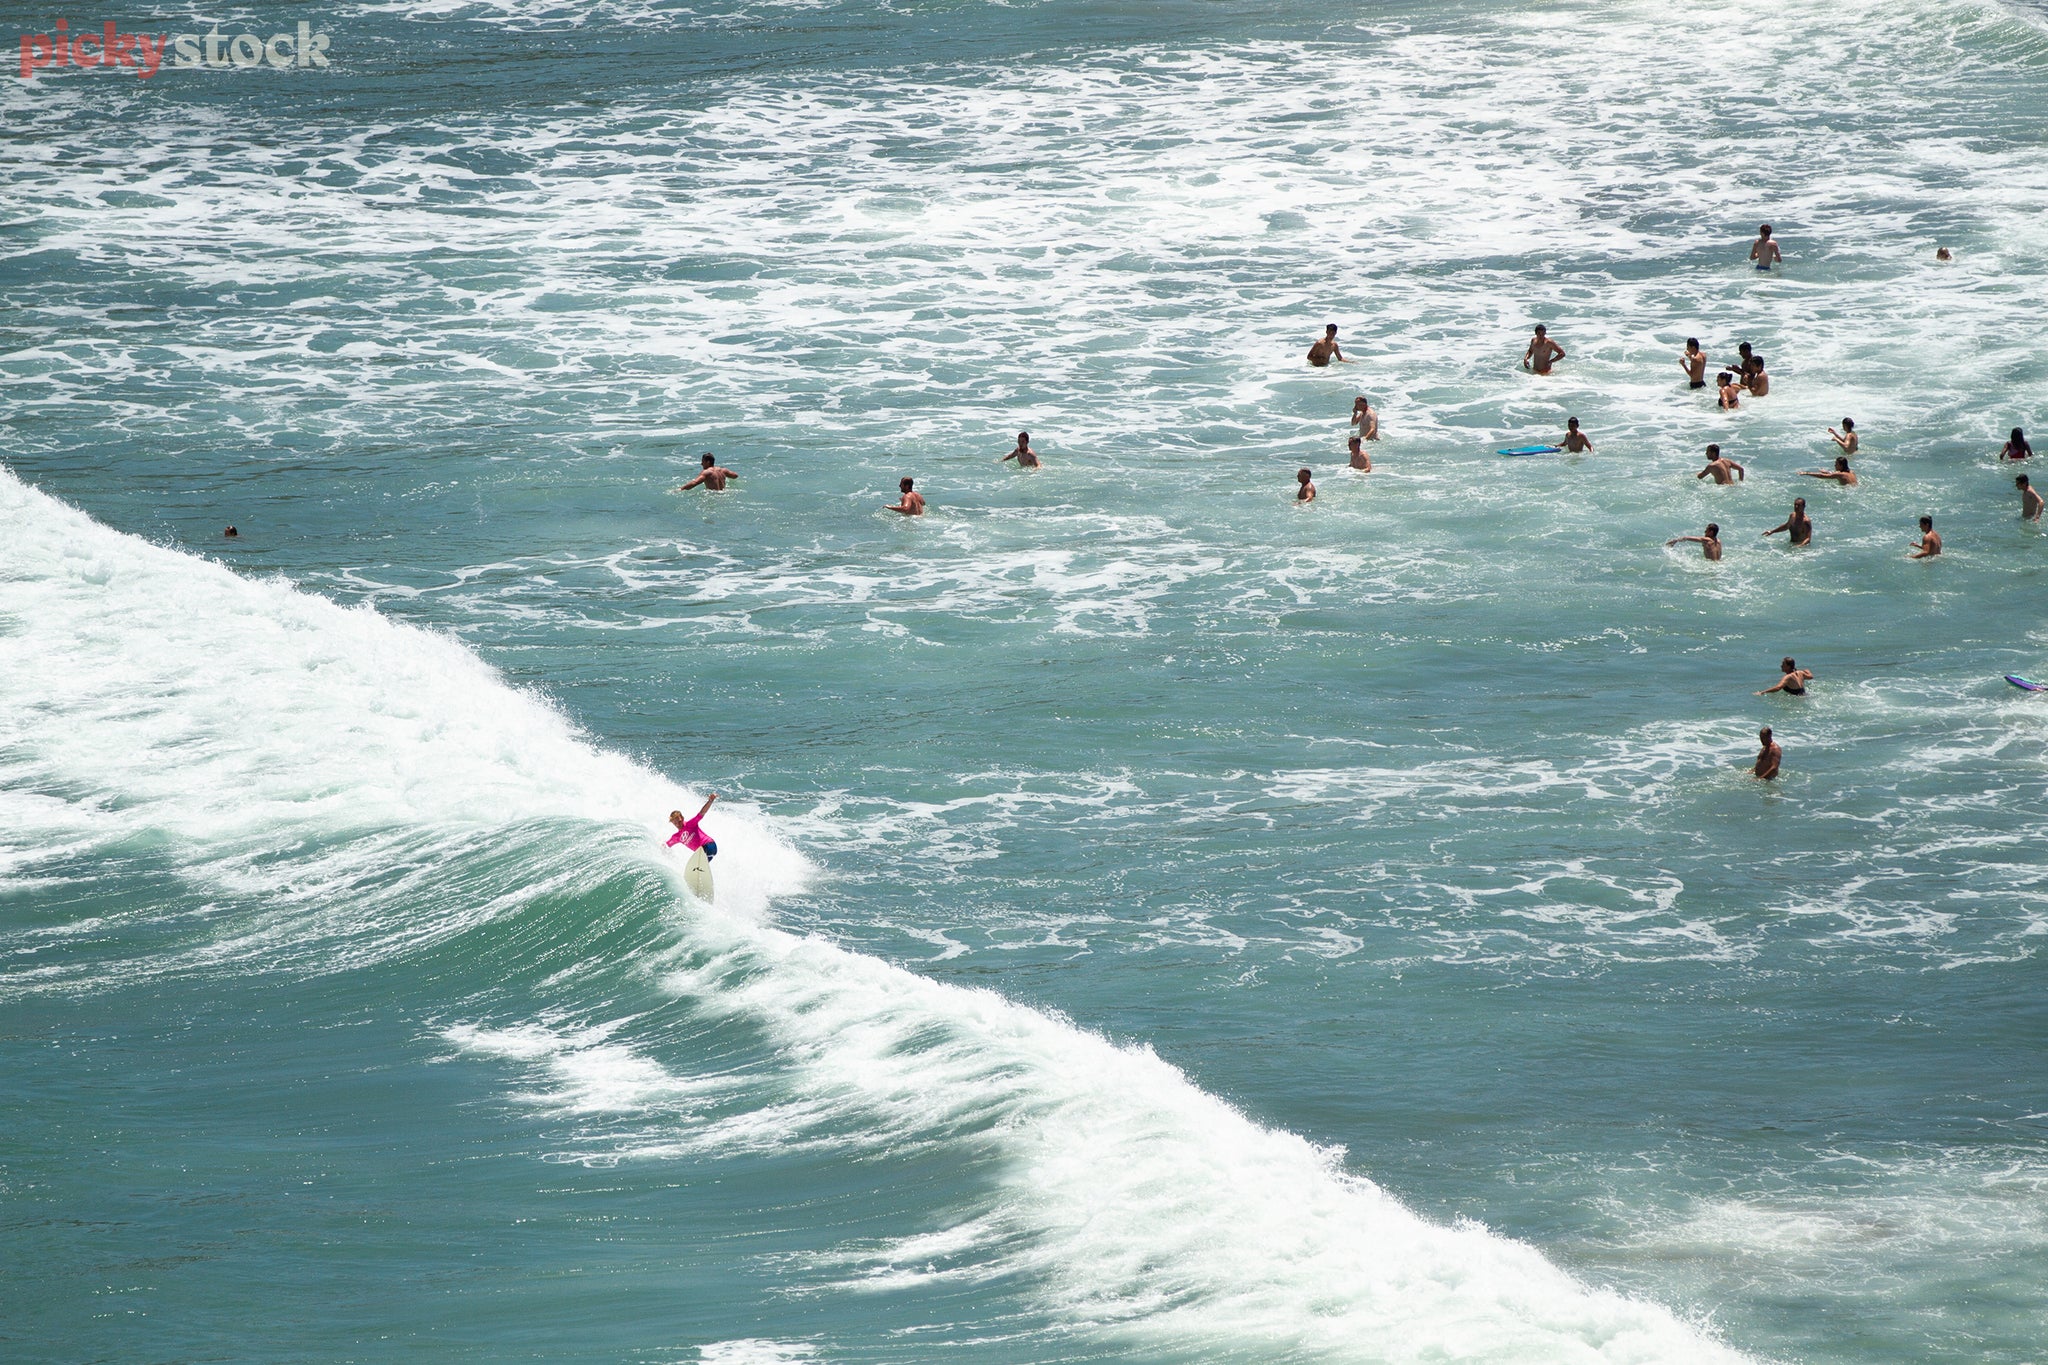 Landscape of female surfer in pink gliding over a crashing wave while two dozen beachgoers play in the clear waters nearby.